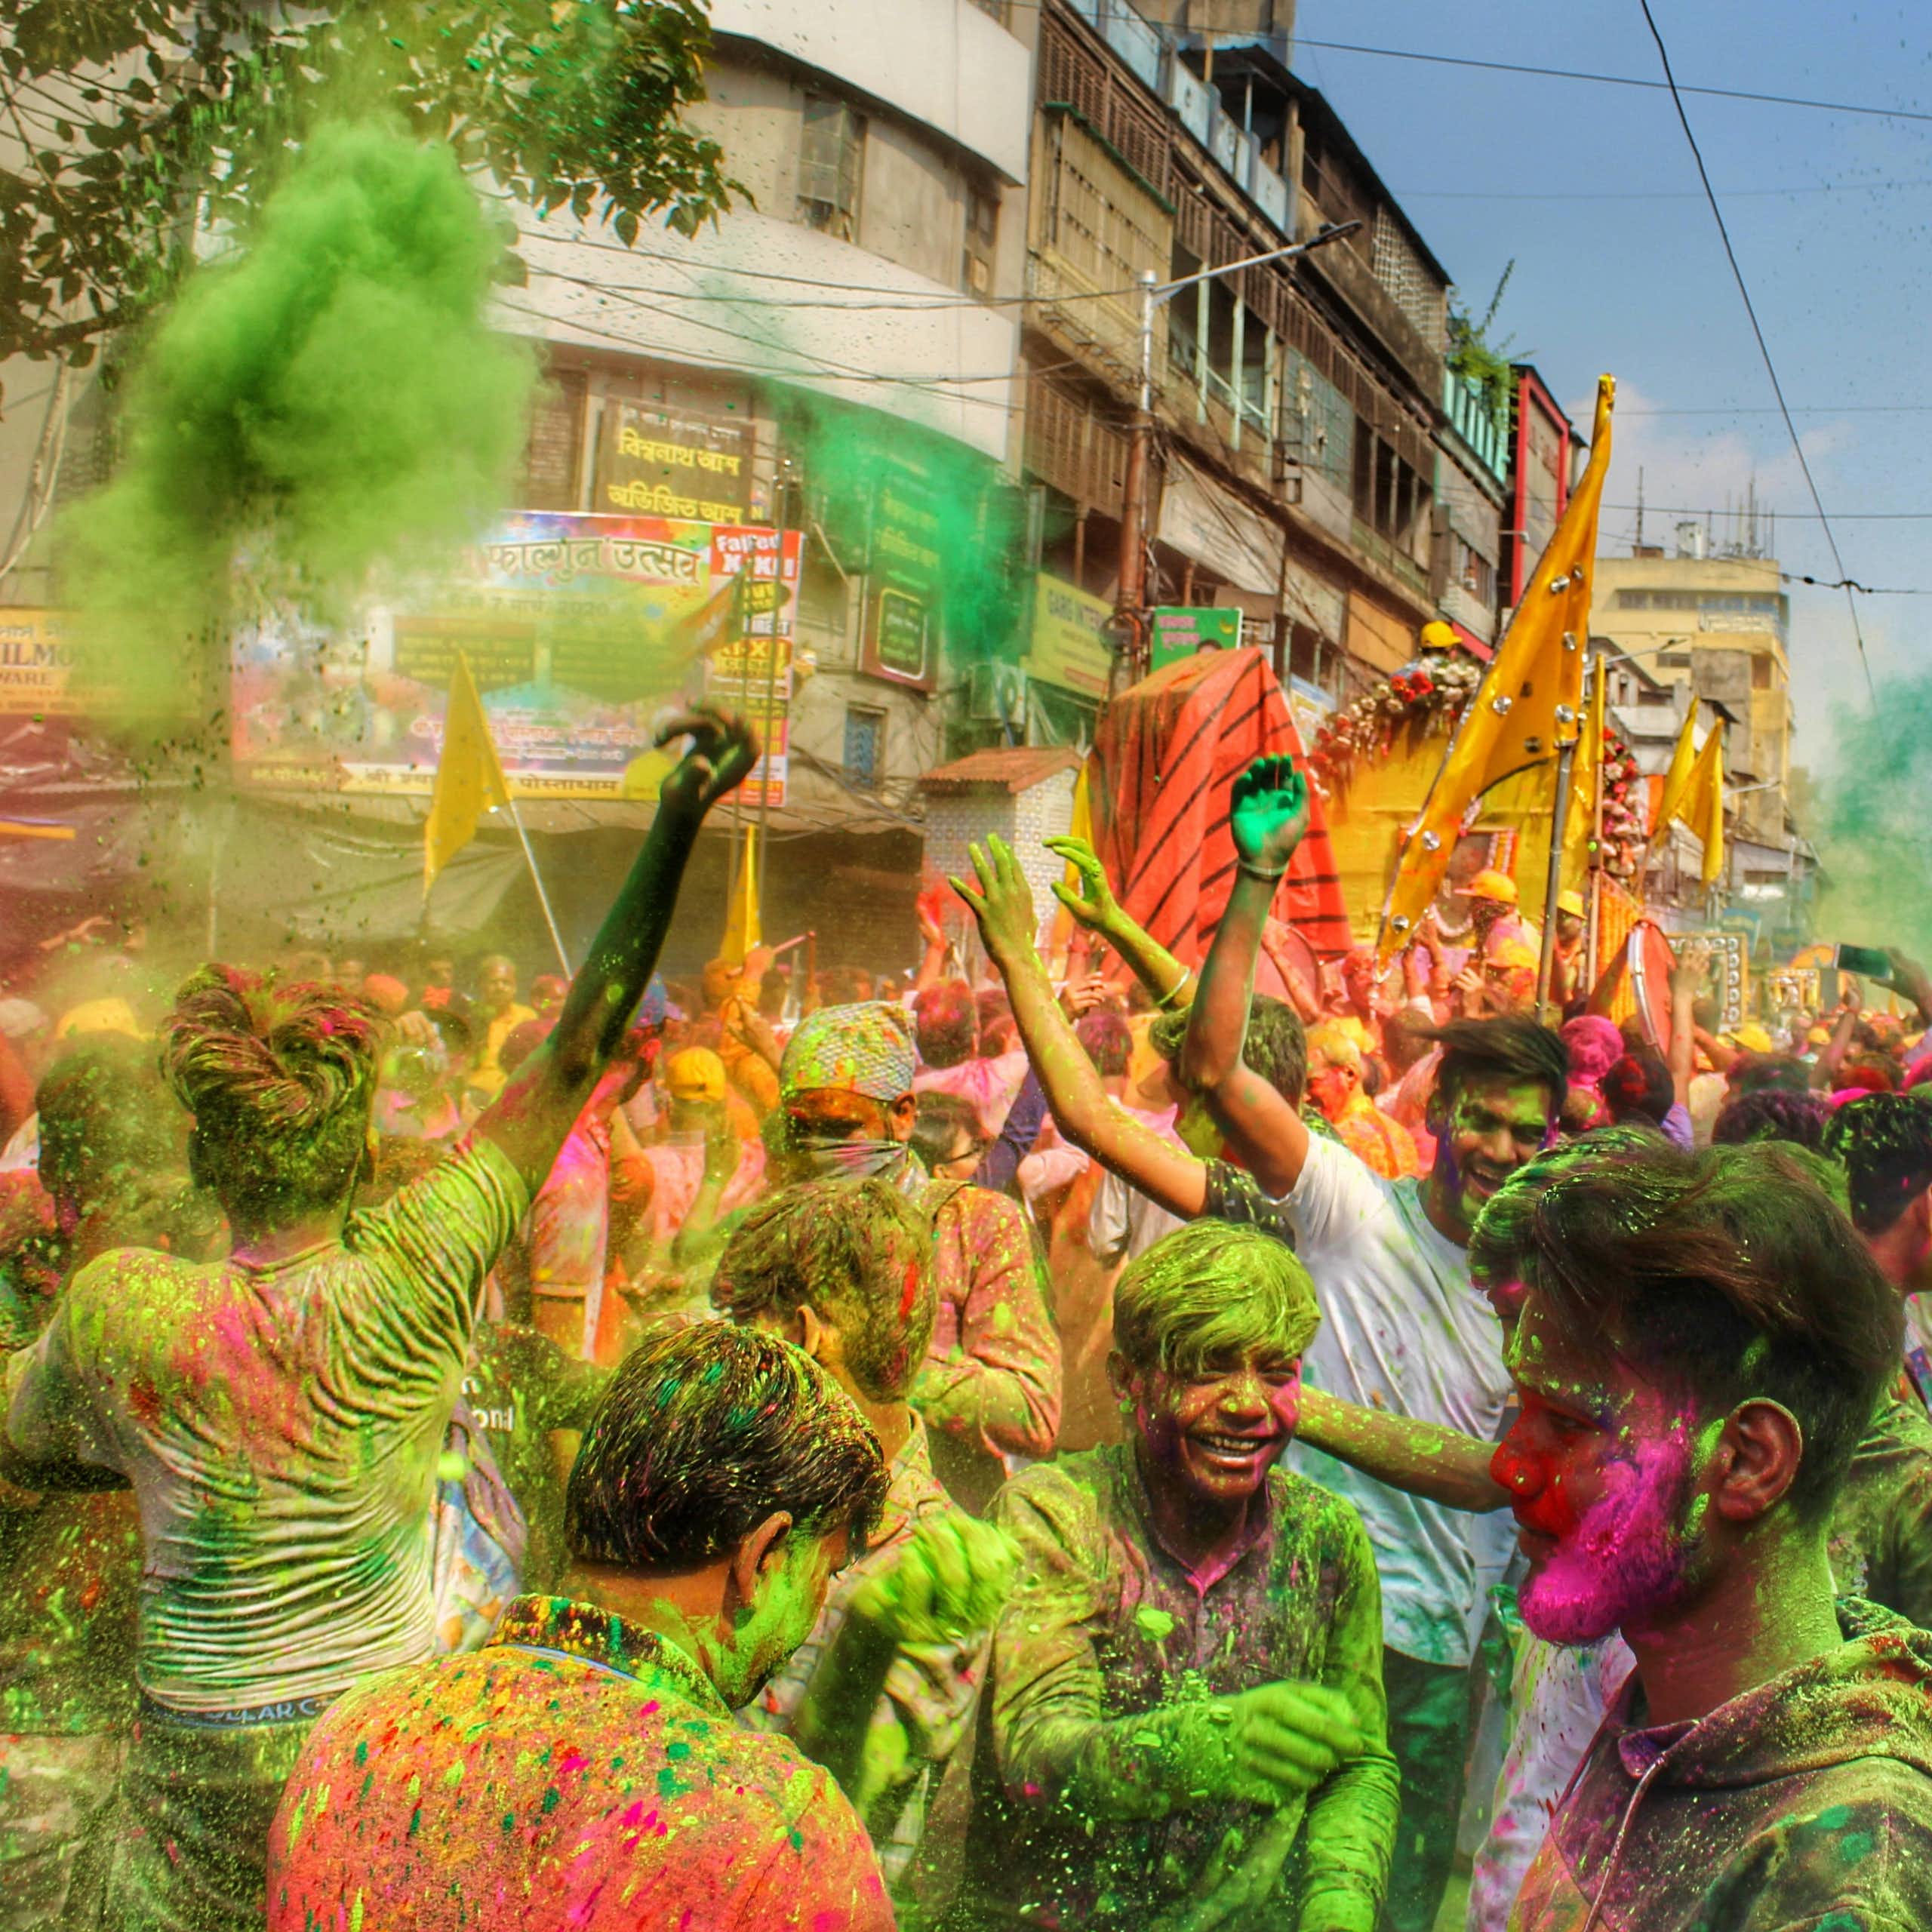 A crowd with clouds of coloured powders.